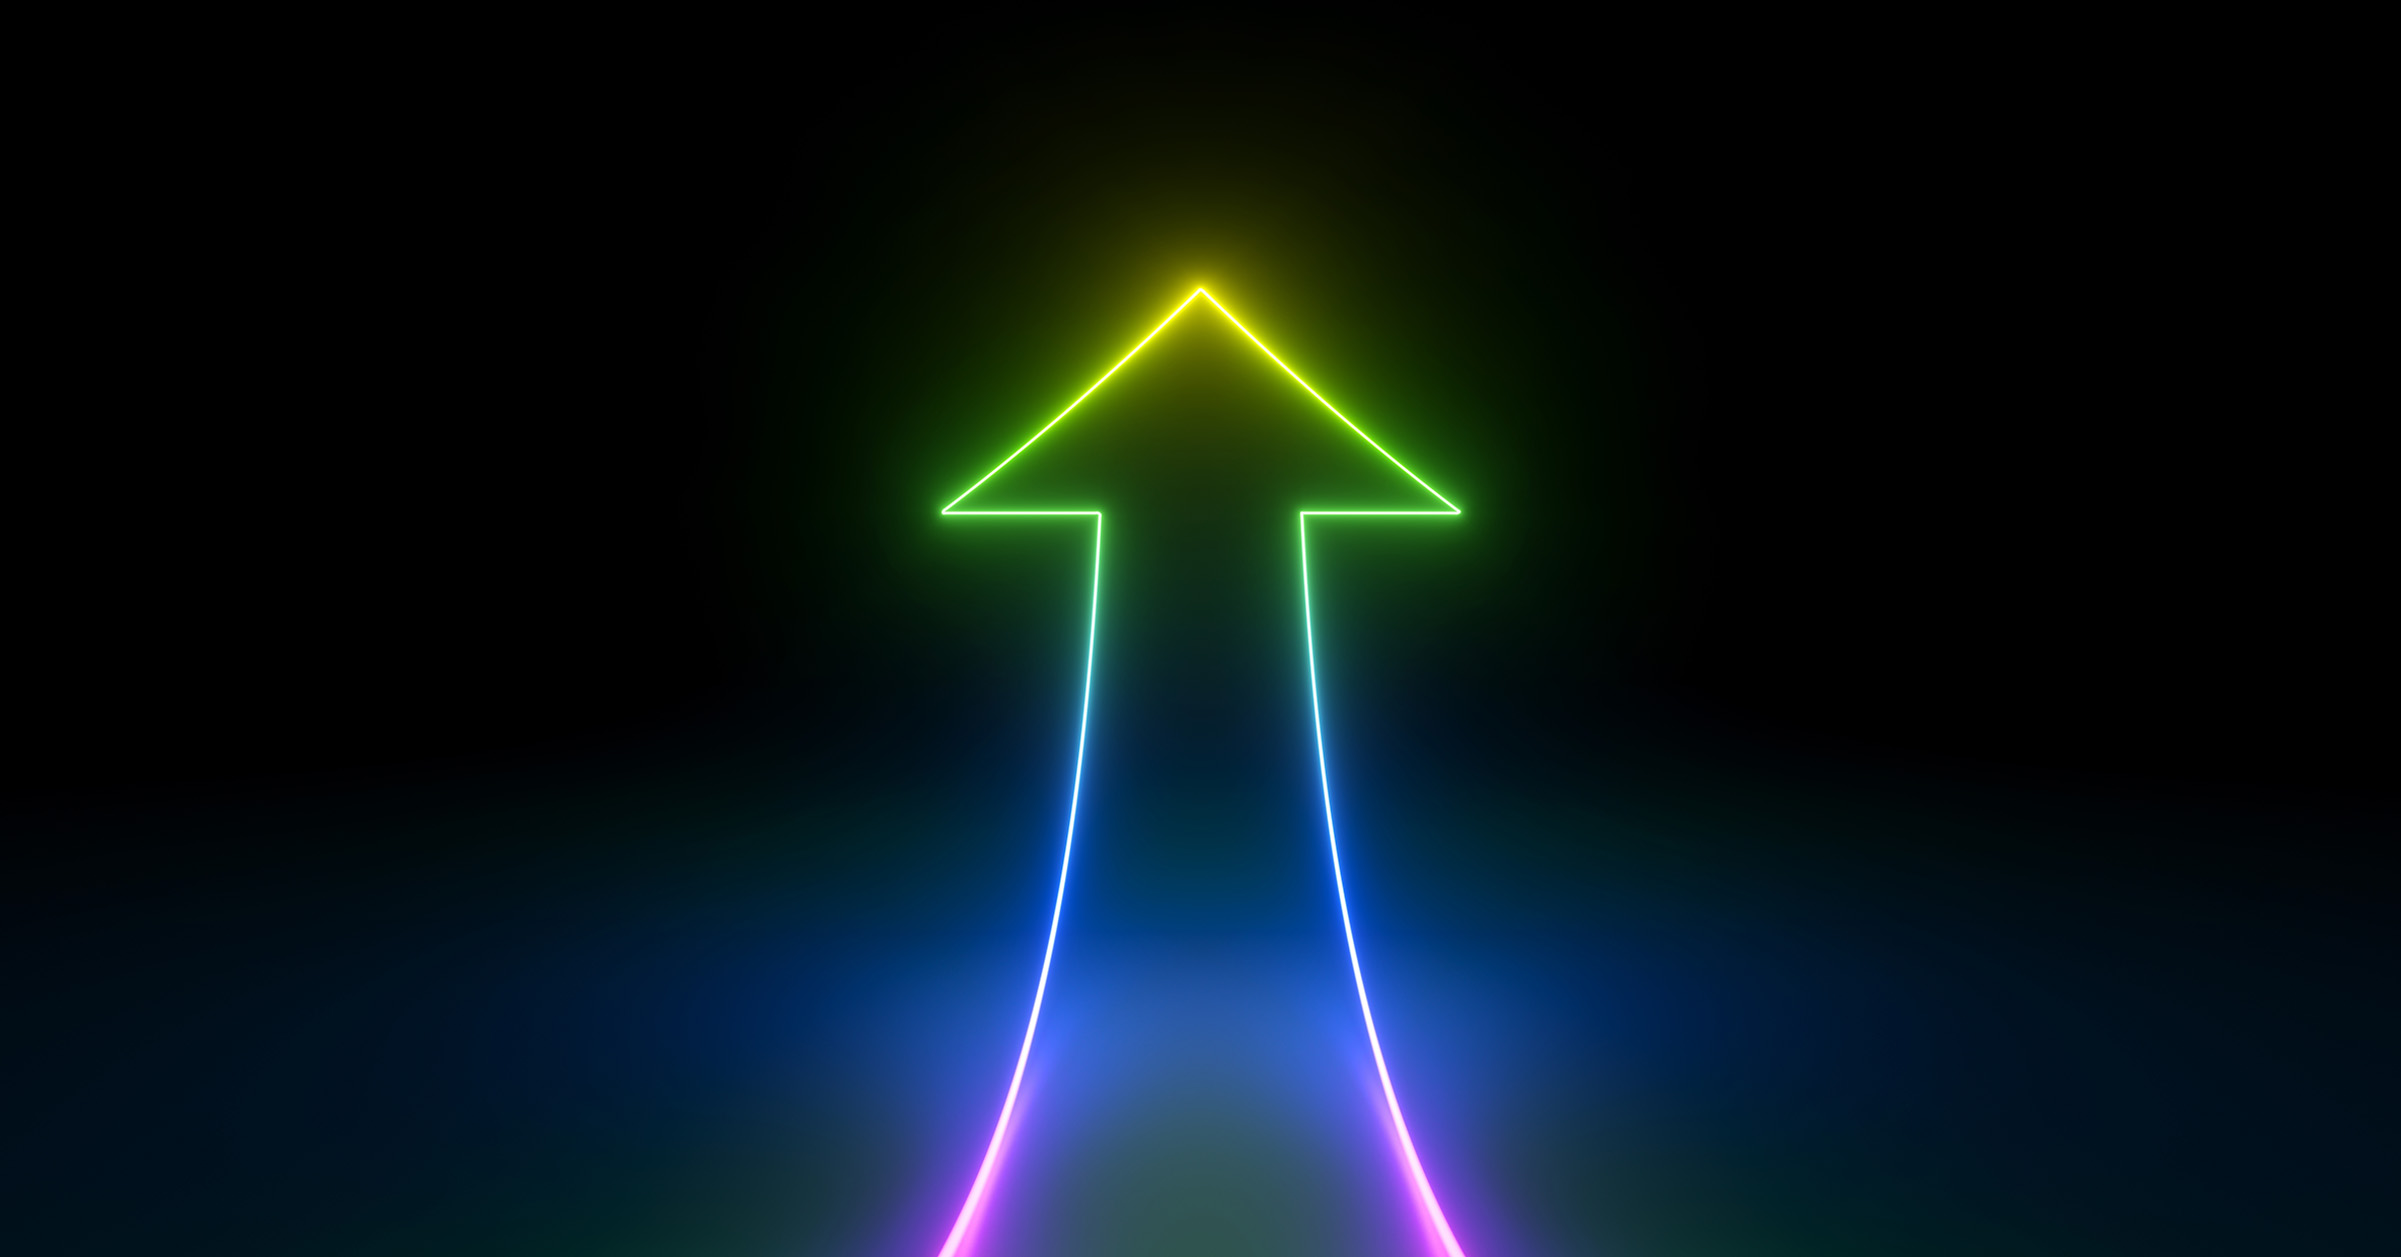 A glowing rainbow-colored-outline arrow pointing upwards against a black background